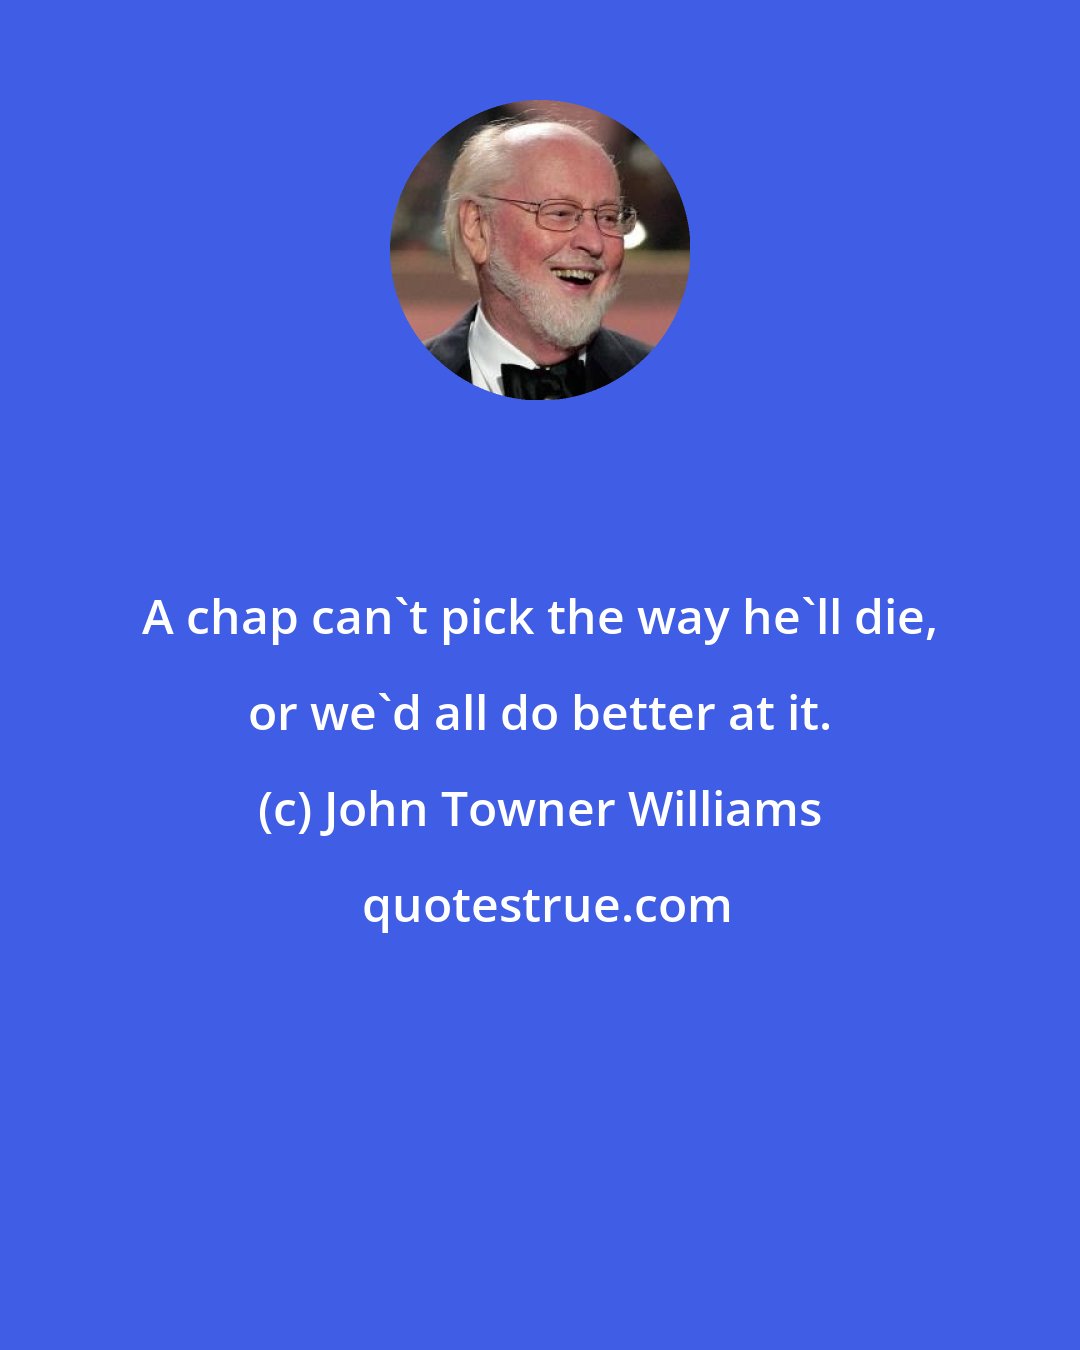 John Towner Williams: A chap can't pick the way he'll die, or we'd all do better at it.